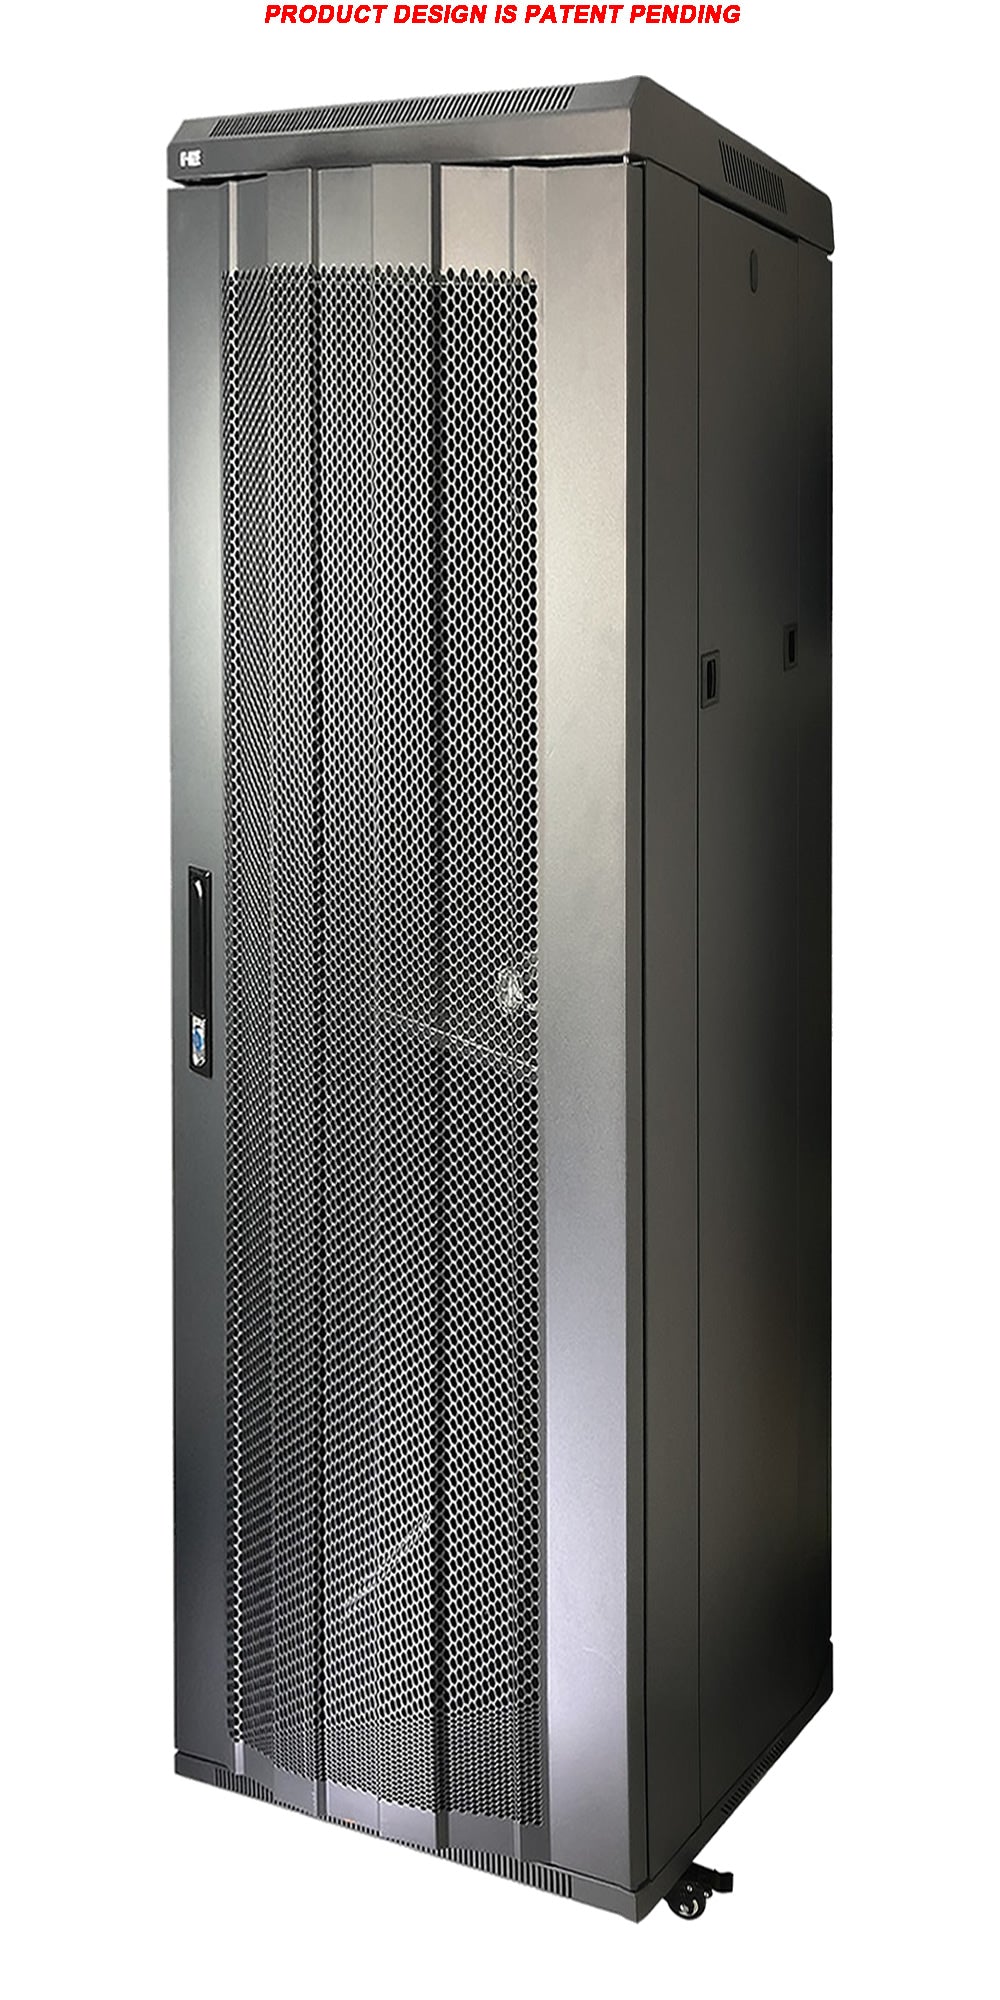 07-6642E 42U Stand Server / Network Cabinet - Extra Deep, Locking Metal Door and Casters with Brake